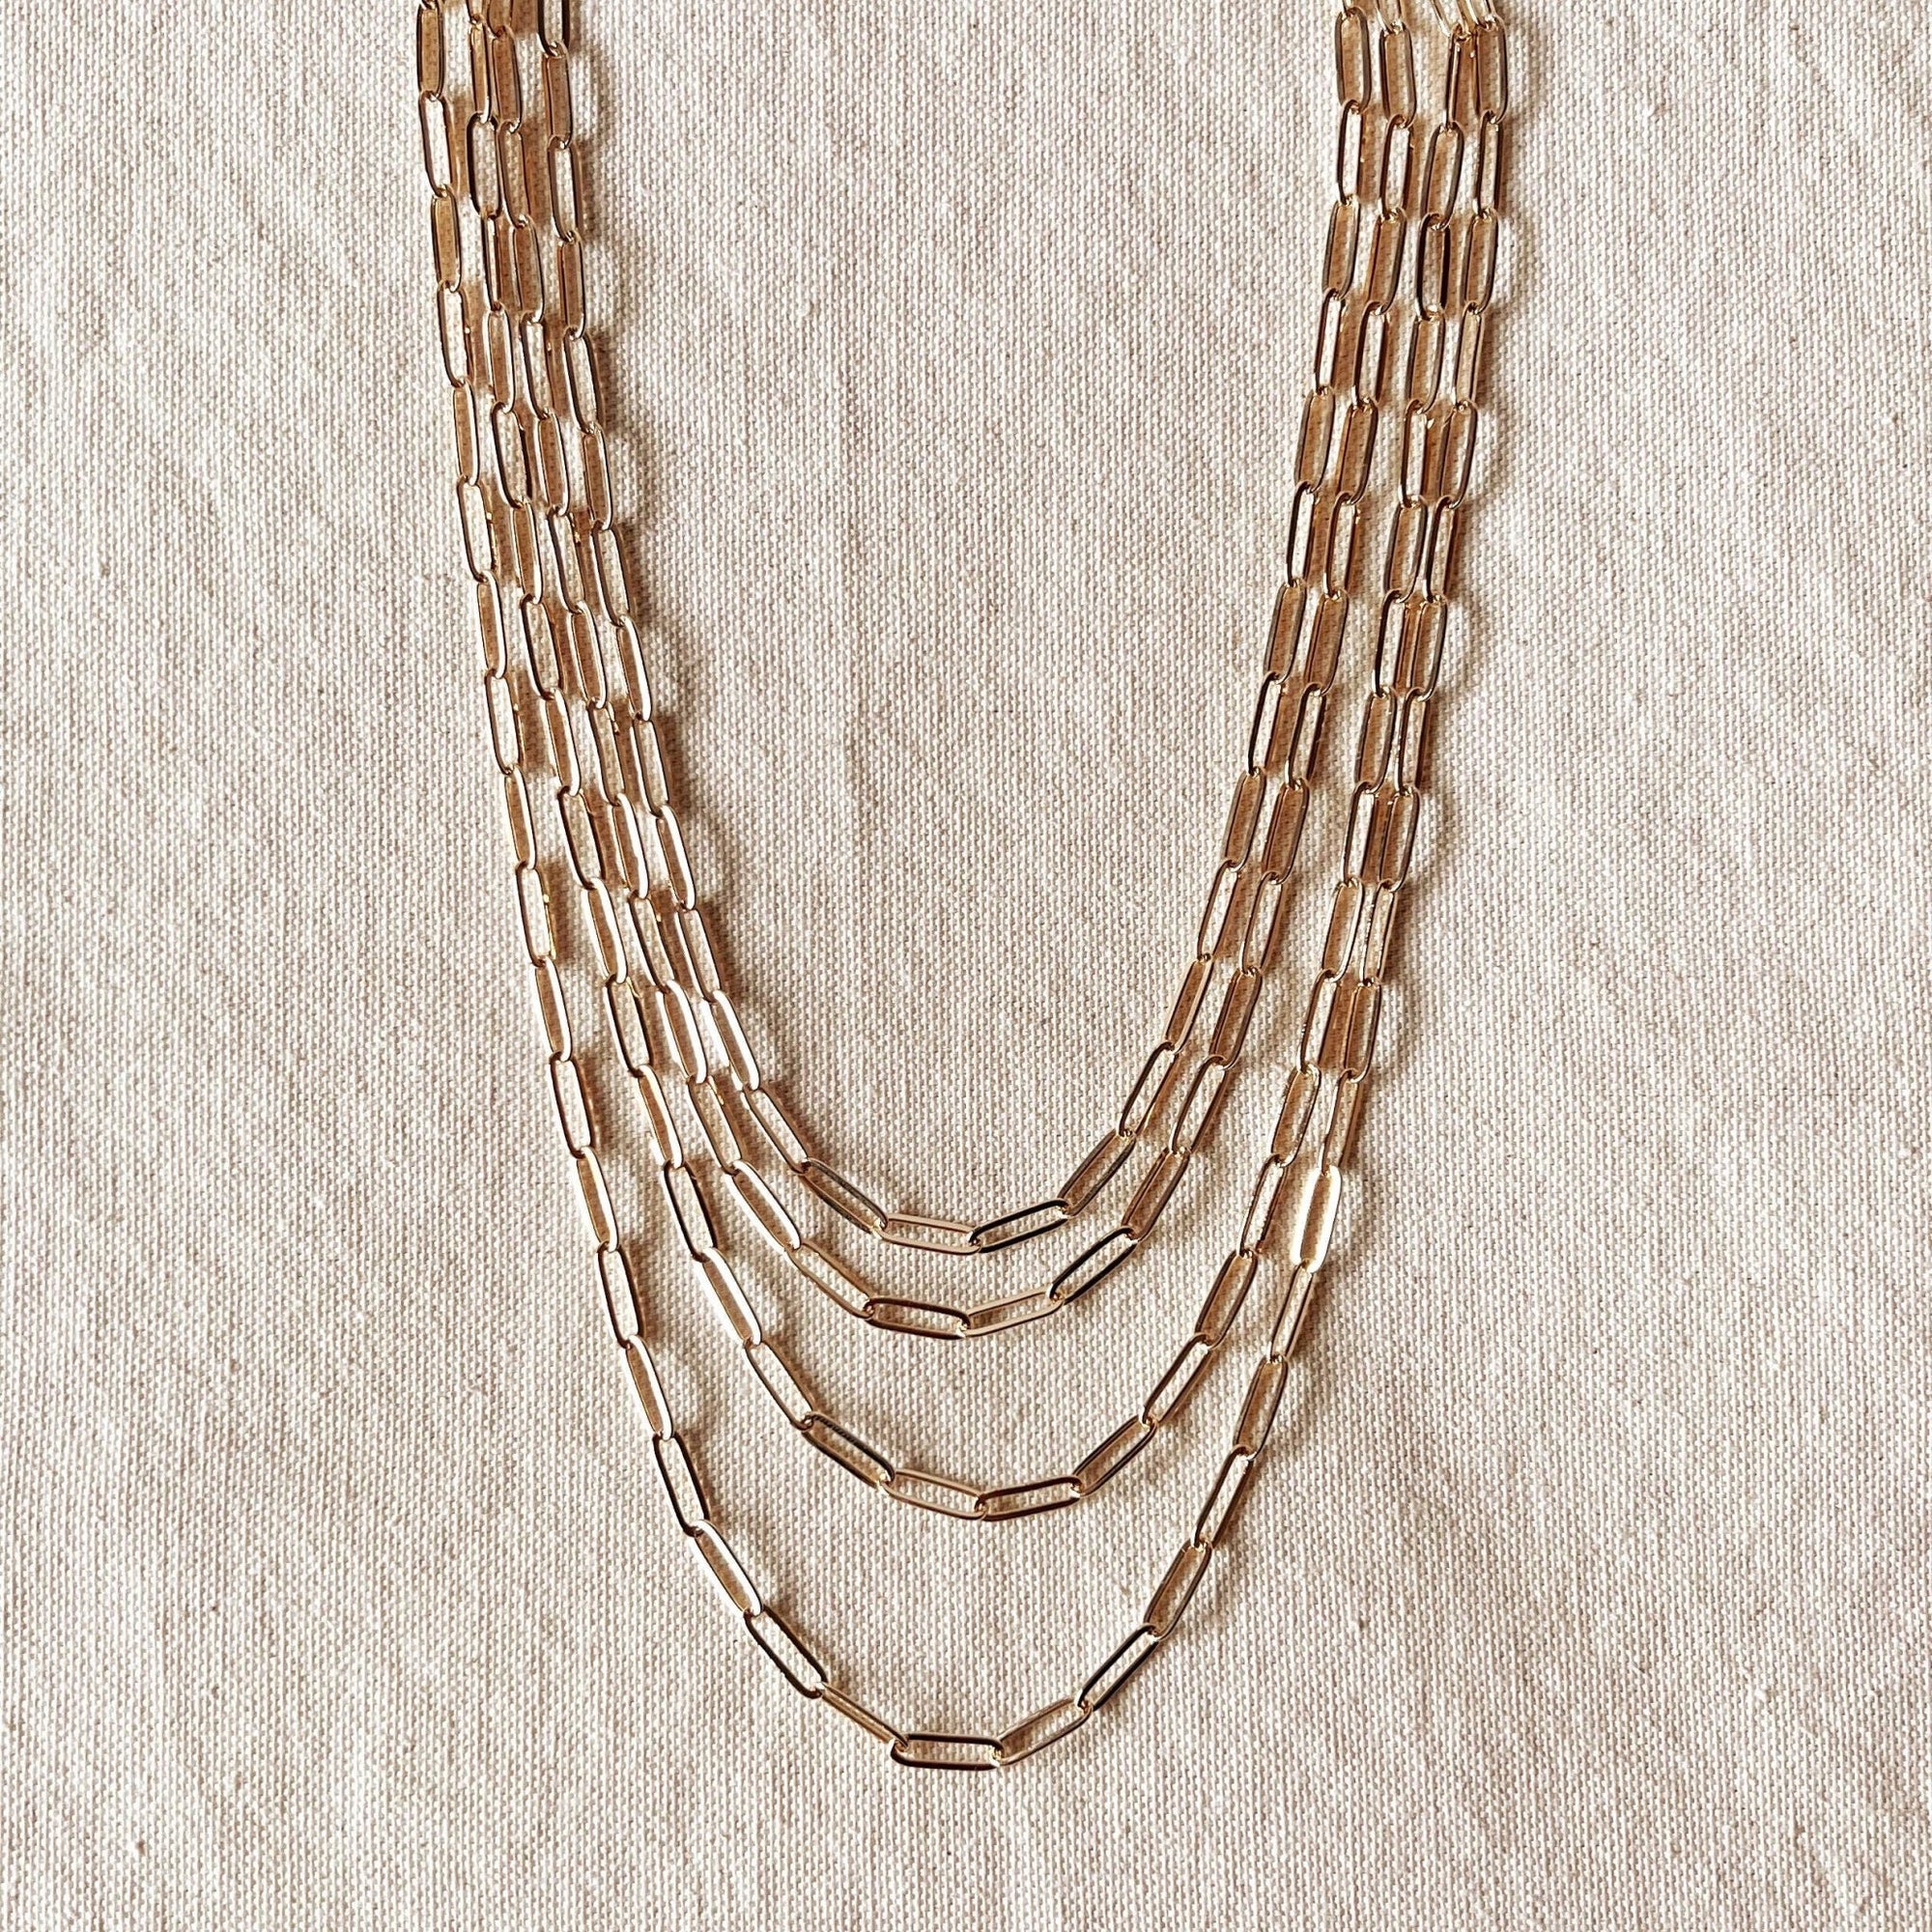 Classic Paperclip Necklace, 18k Gold Filled, Abigail Fox - Abigail Fox Designs